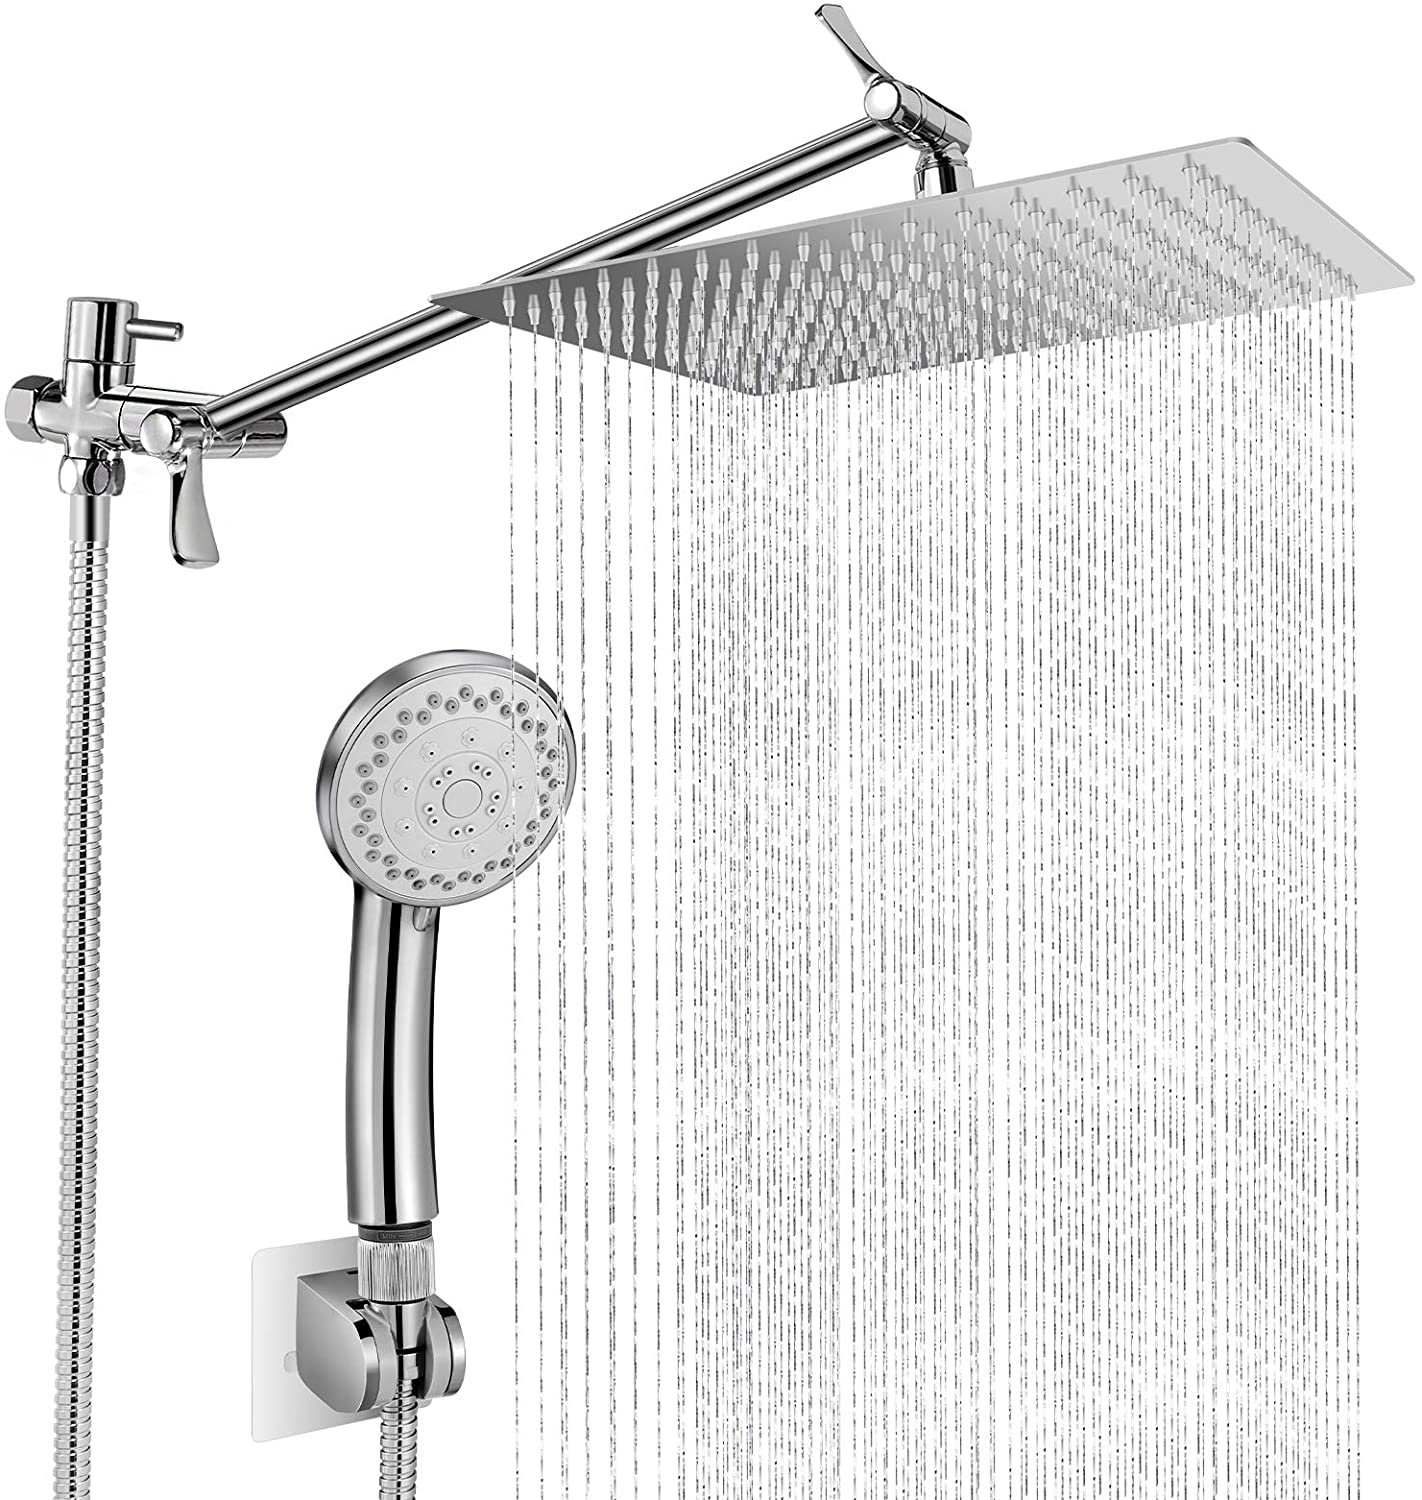 8-inch Shower Head Wall Mount Brushed Rain Square Sprayer W/ Extension Arm USA 